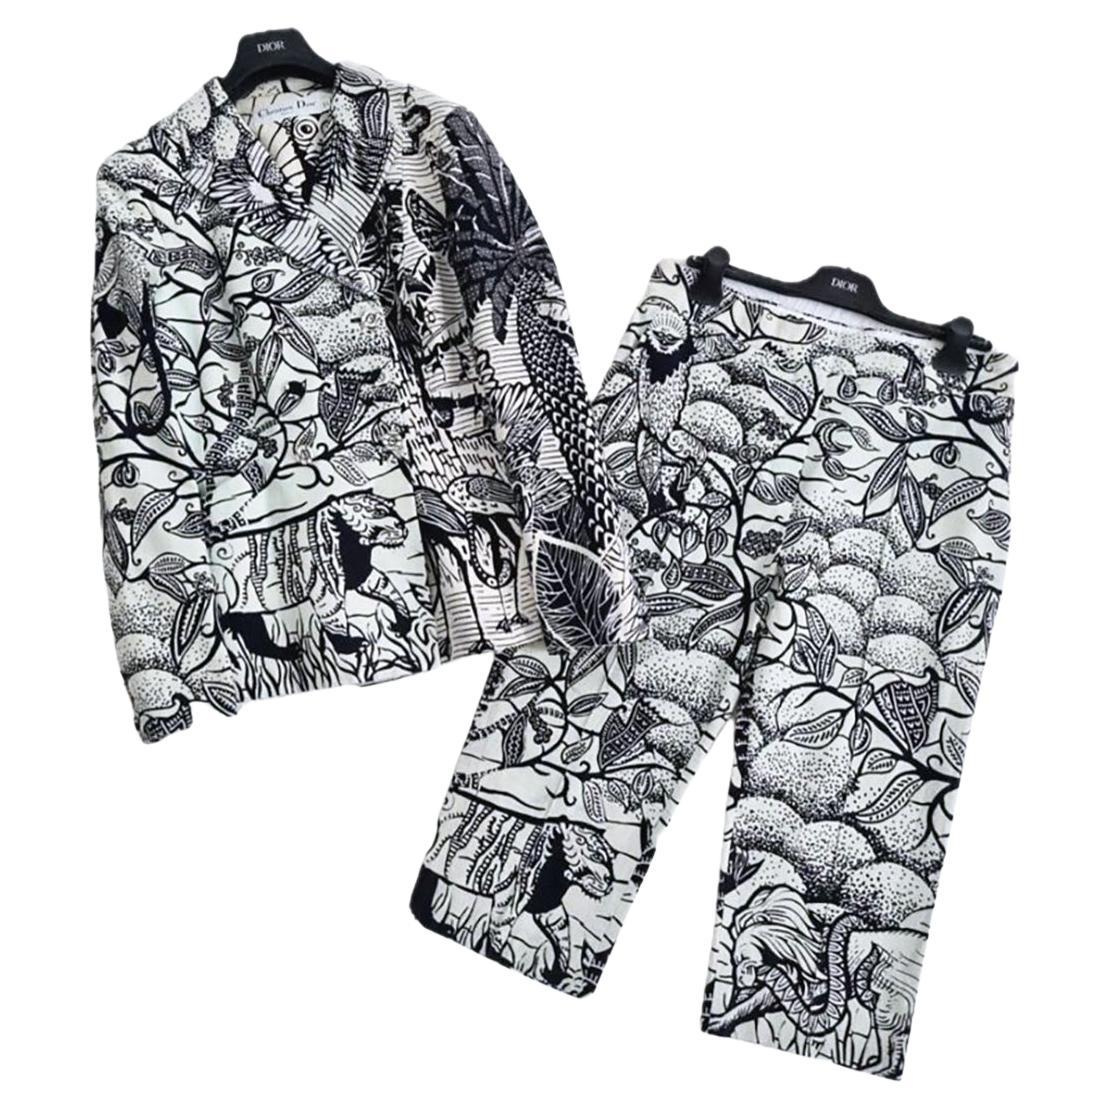 Dior Jungle Iconic Bar 30 Montaigne Jacket and Trousers Ensemble